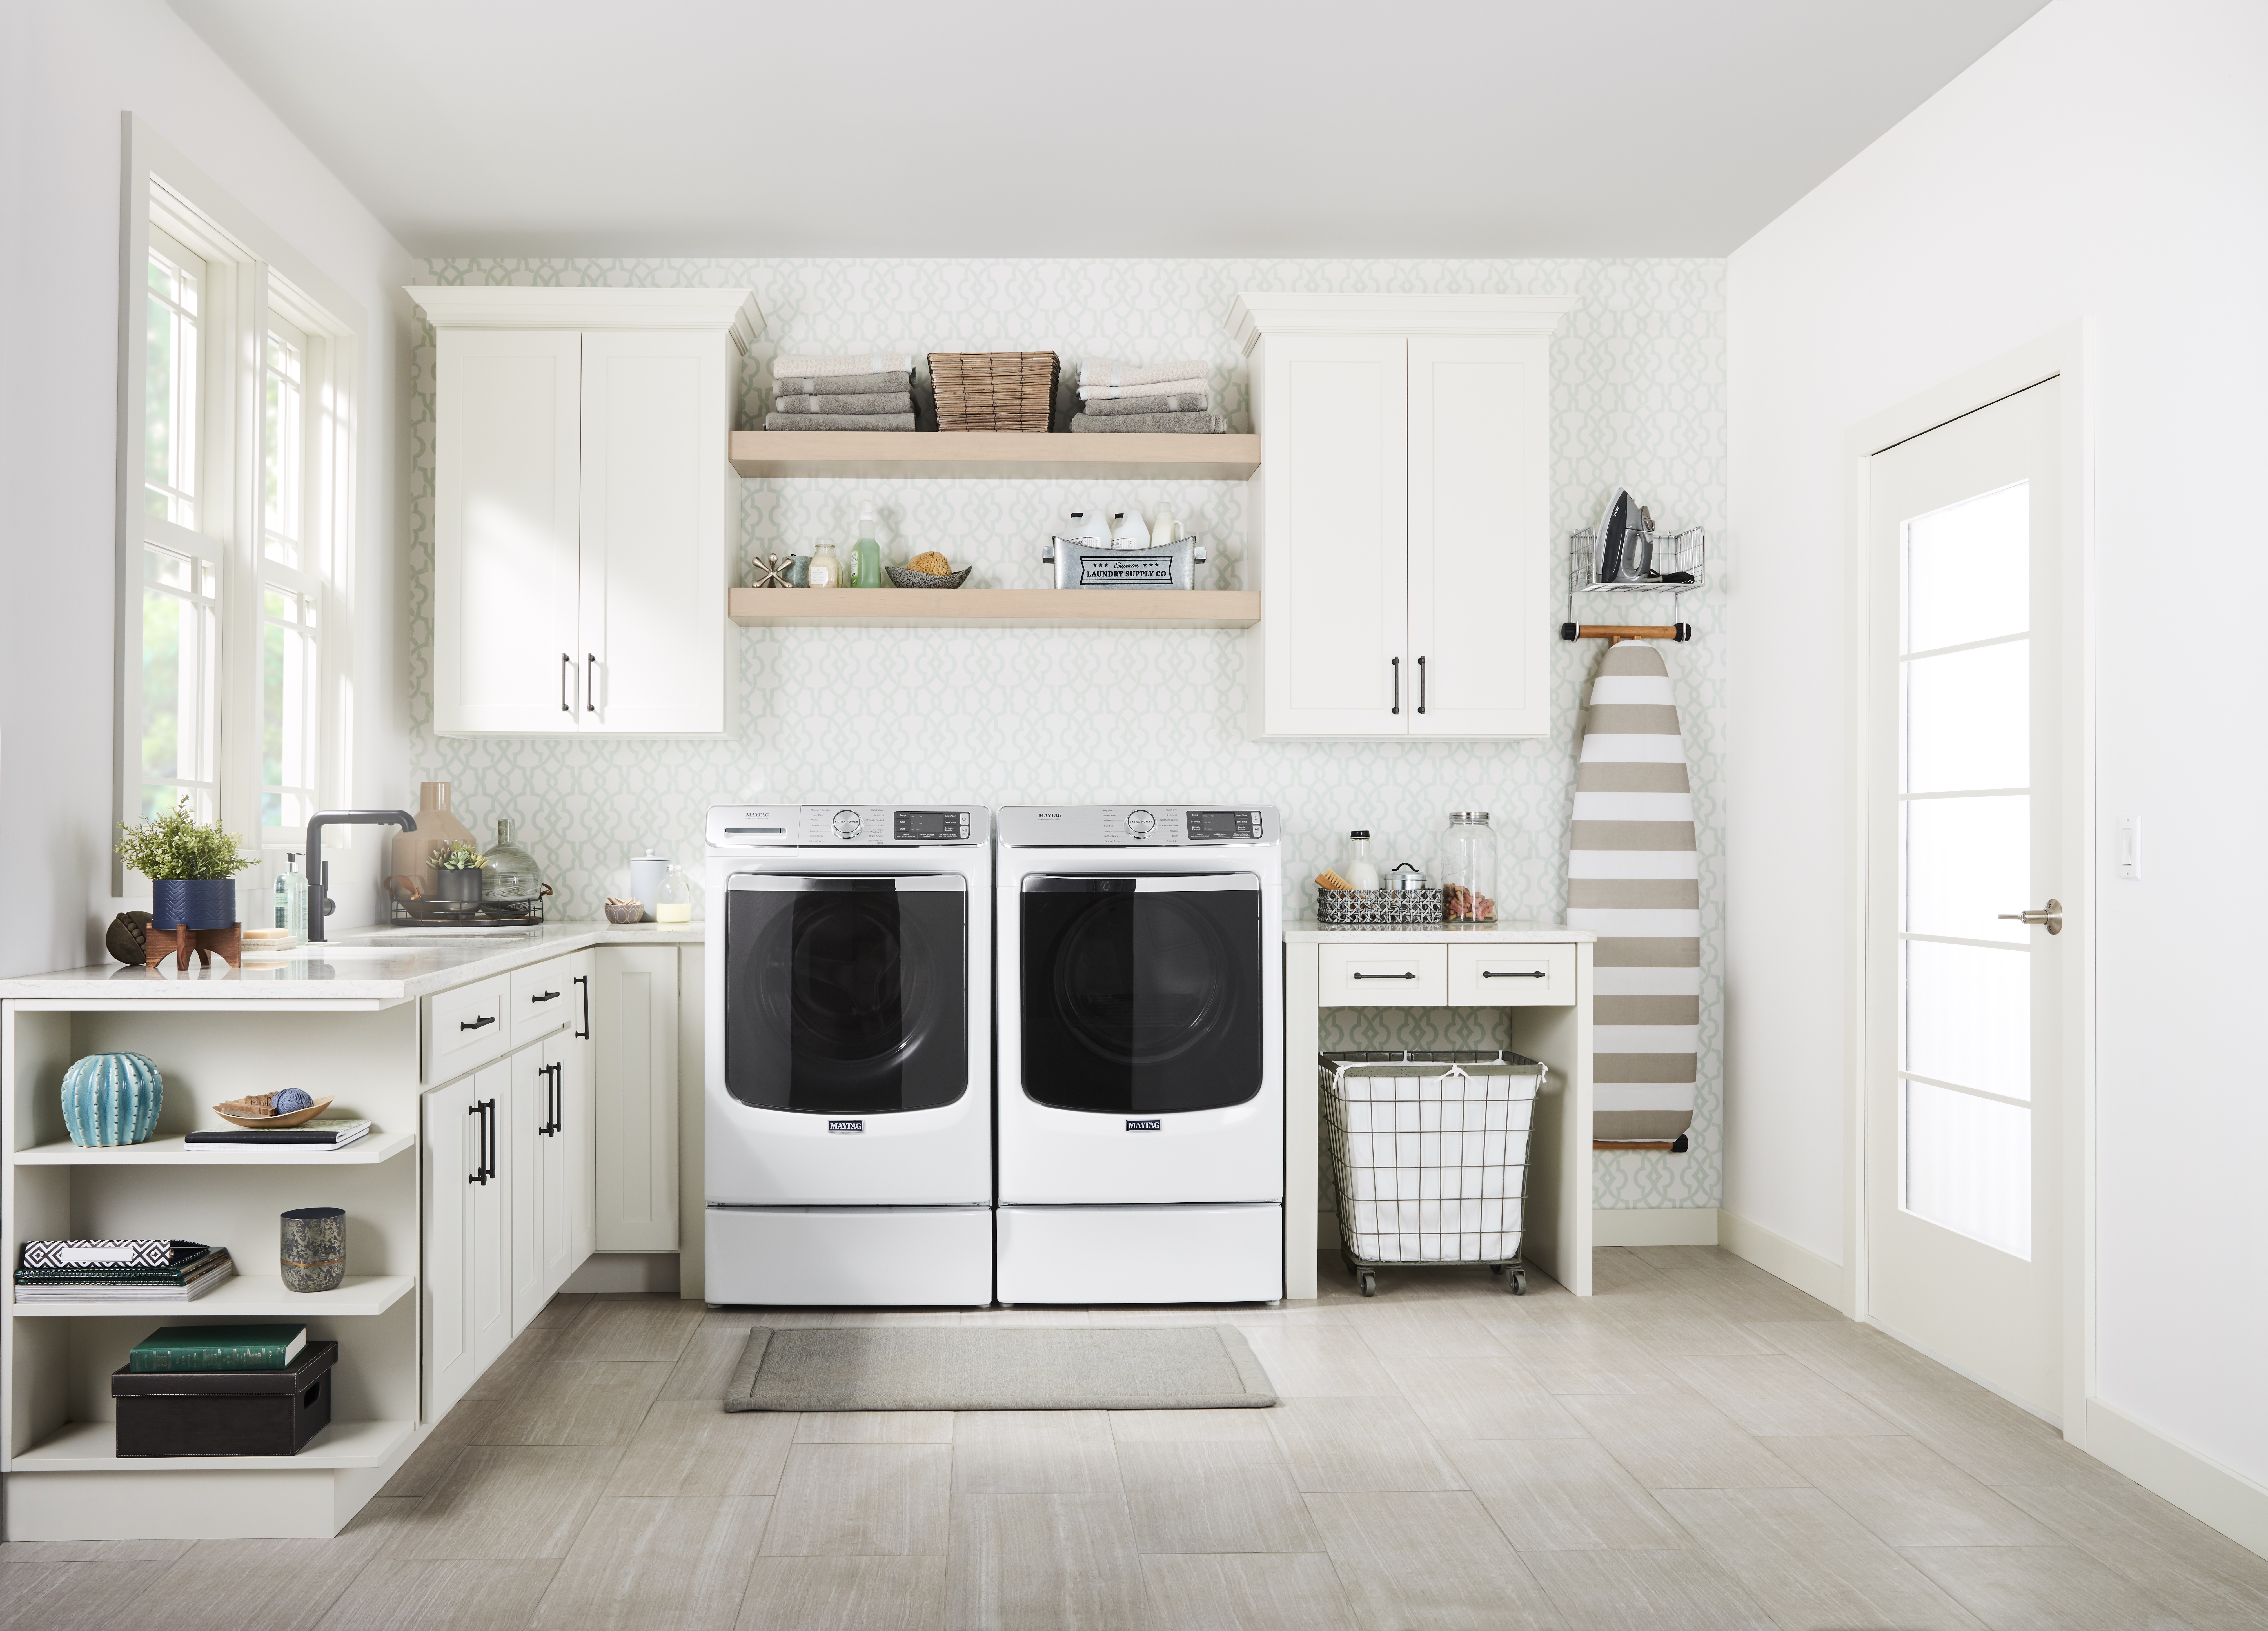 Our Complete Viking Range Buying Guide with Reviews, Friedmans Appliance, Bay Area